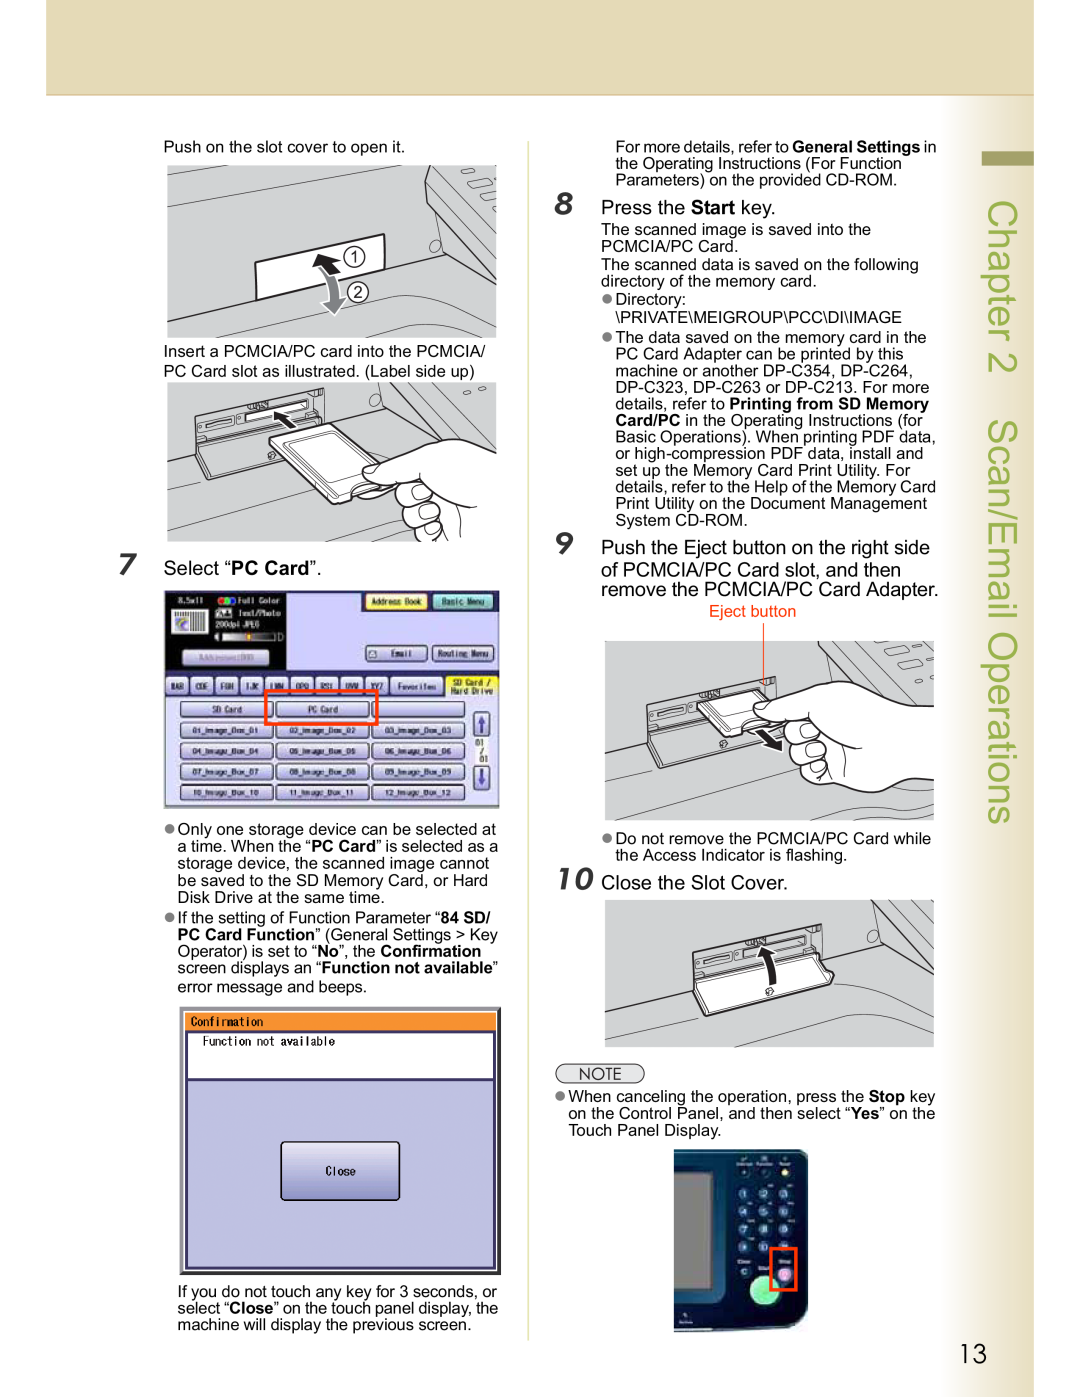 Panasonic DP-C323, DP-C354 manual Select “PC Card”, Press the Start key, Push the Eject button on the right side, Scan/Email 